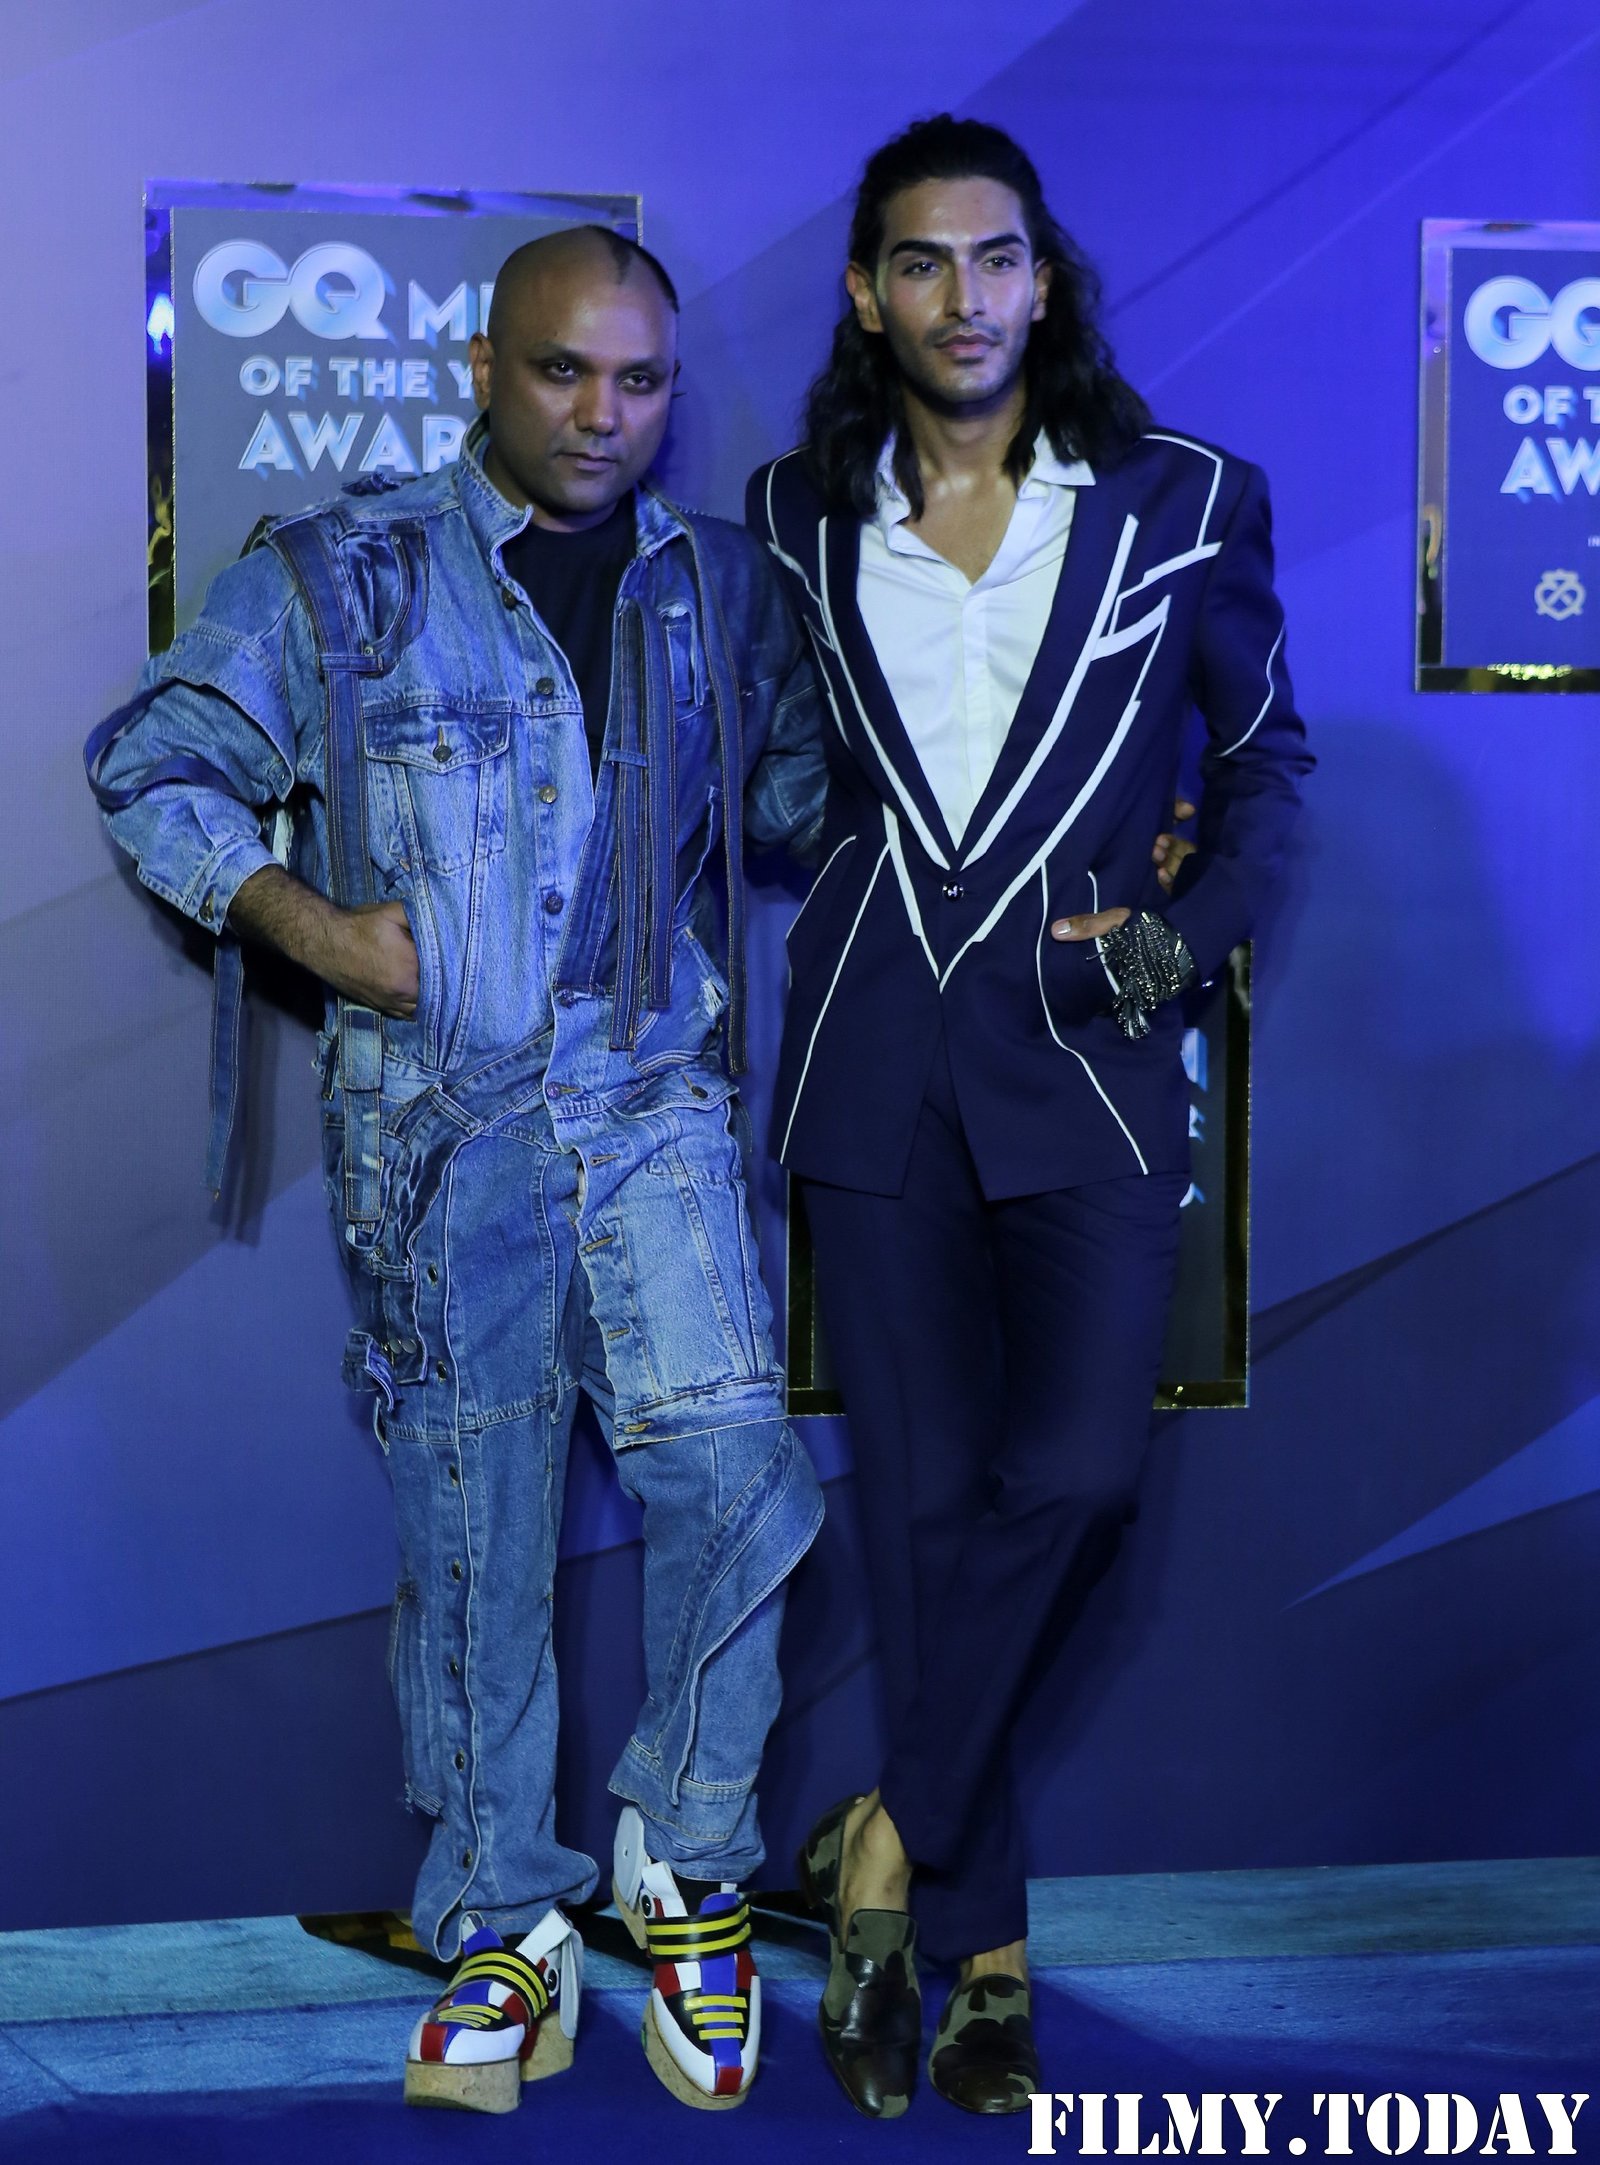 Photos: Celebs At GQ Men Of The Year Awards 2019 | Picture 1688102